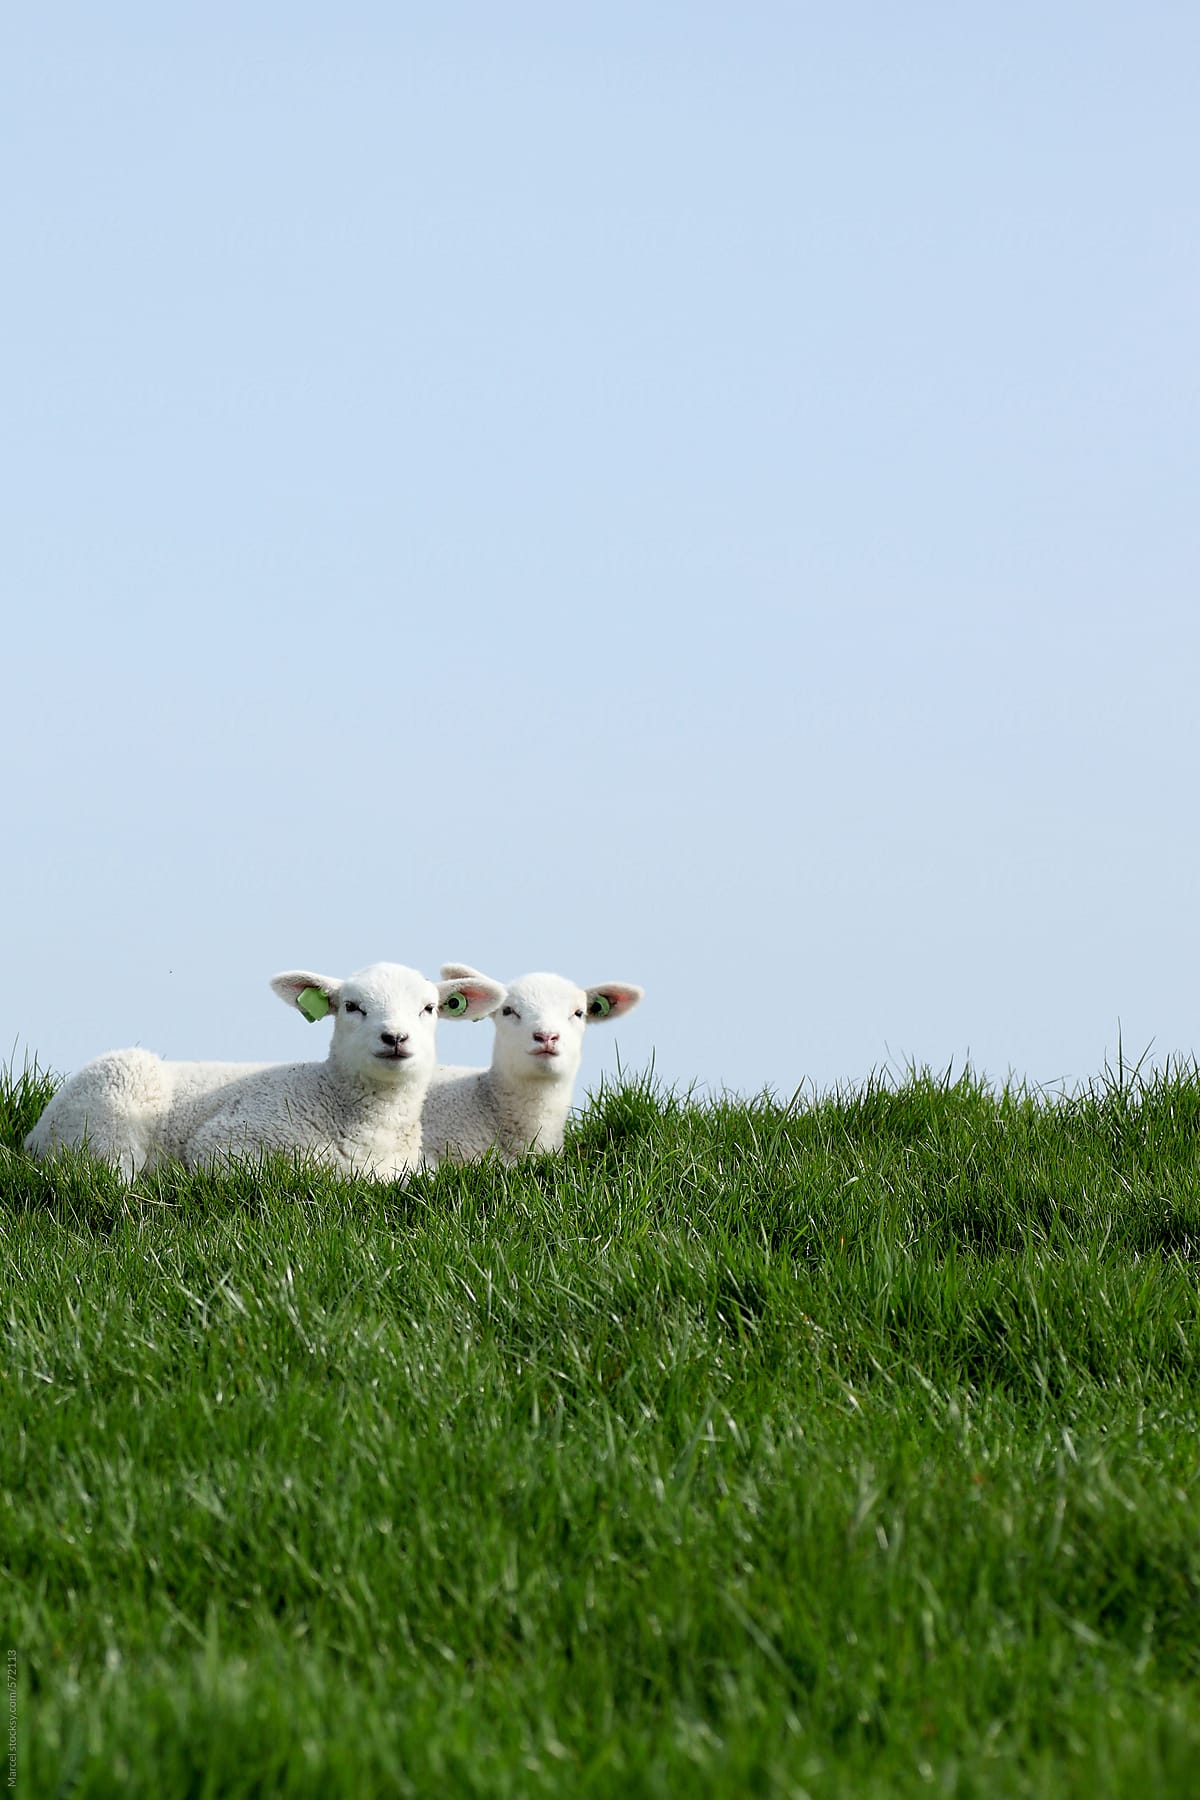 Two young lambs resting in the grass